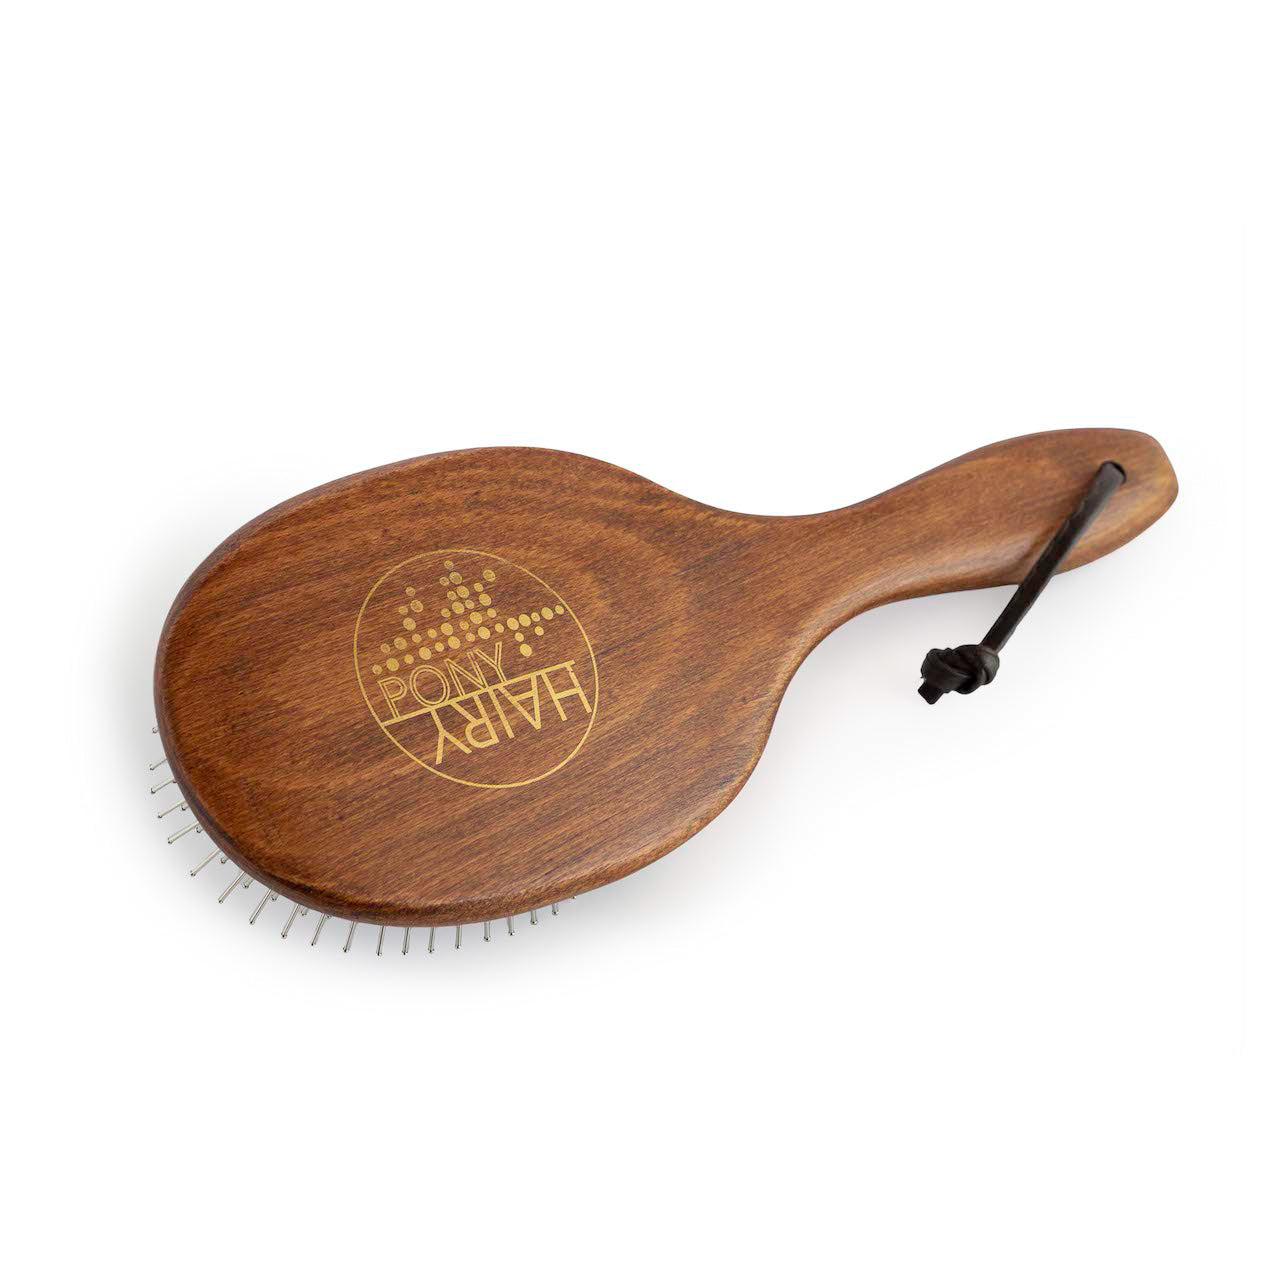 The Hairy Pony Mane and Tail Brush, with beechwood handle and a view of the back of the brush with gold logo detailing..